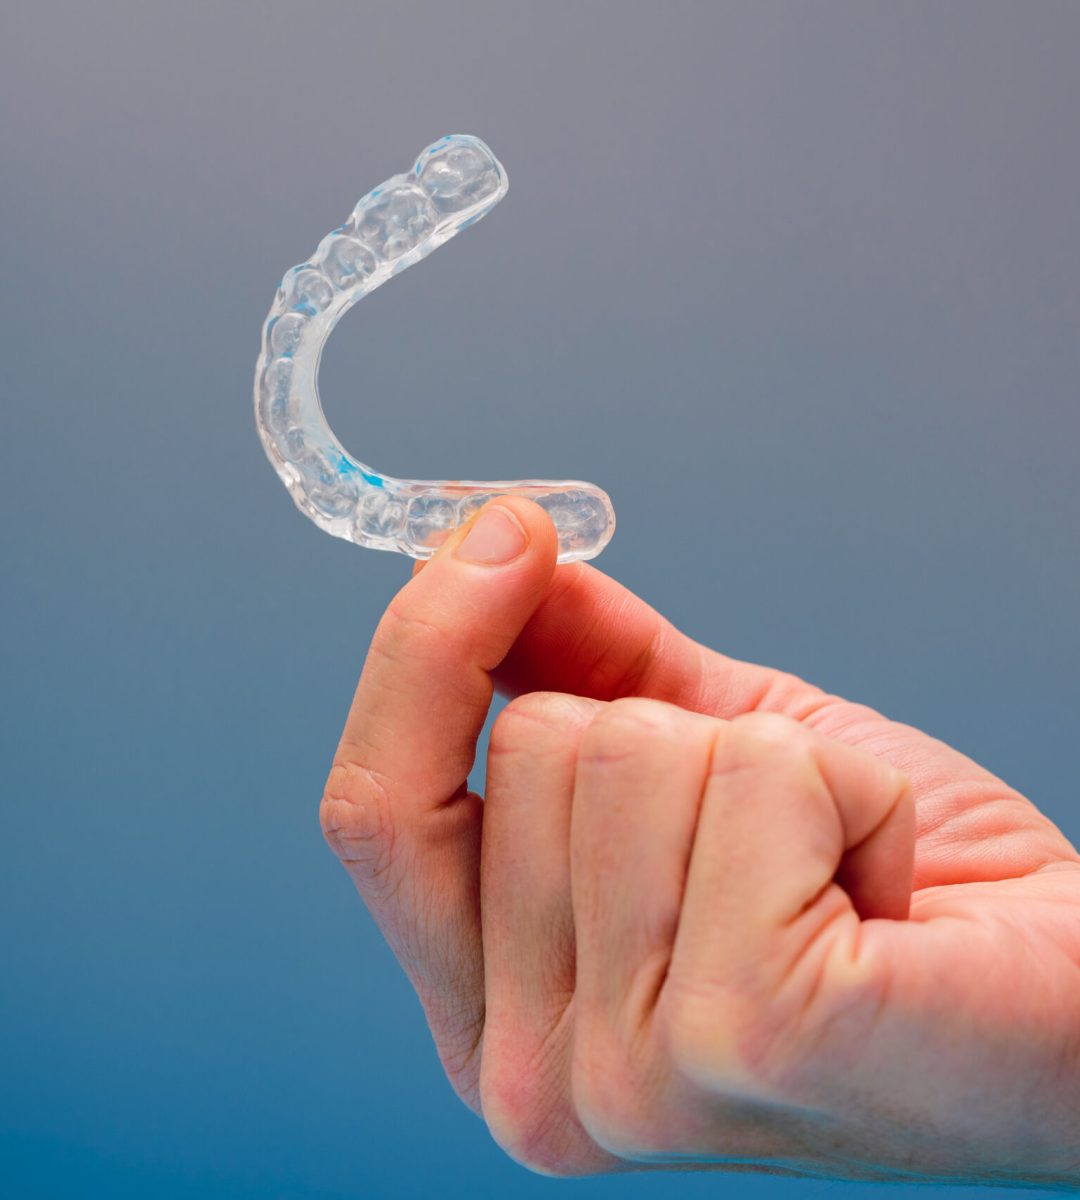 Dental aligner used by dental doctors isolated on blue background.